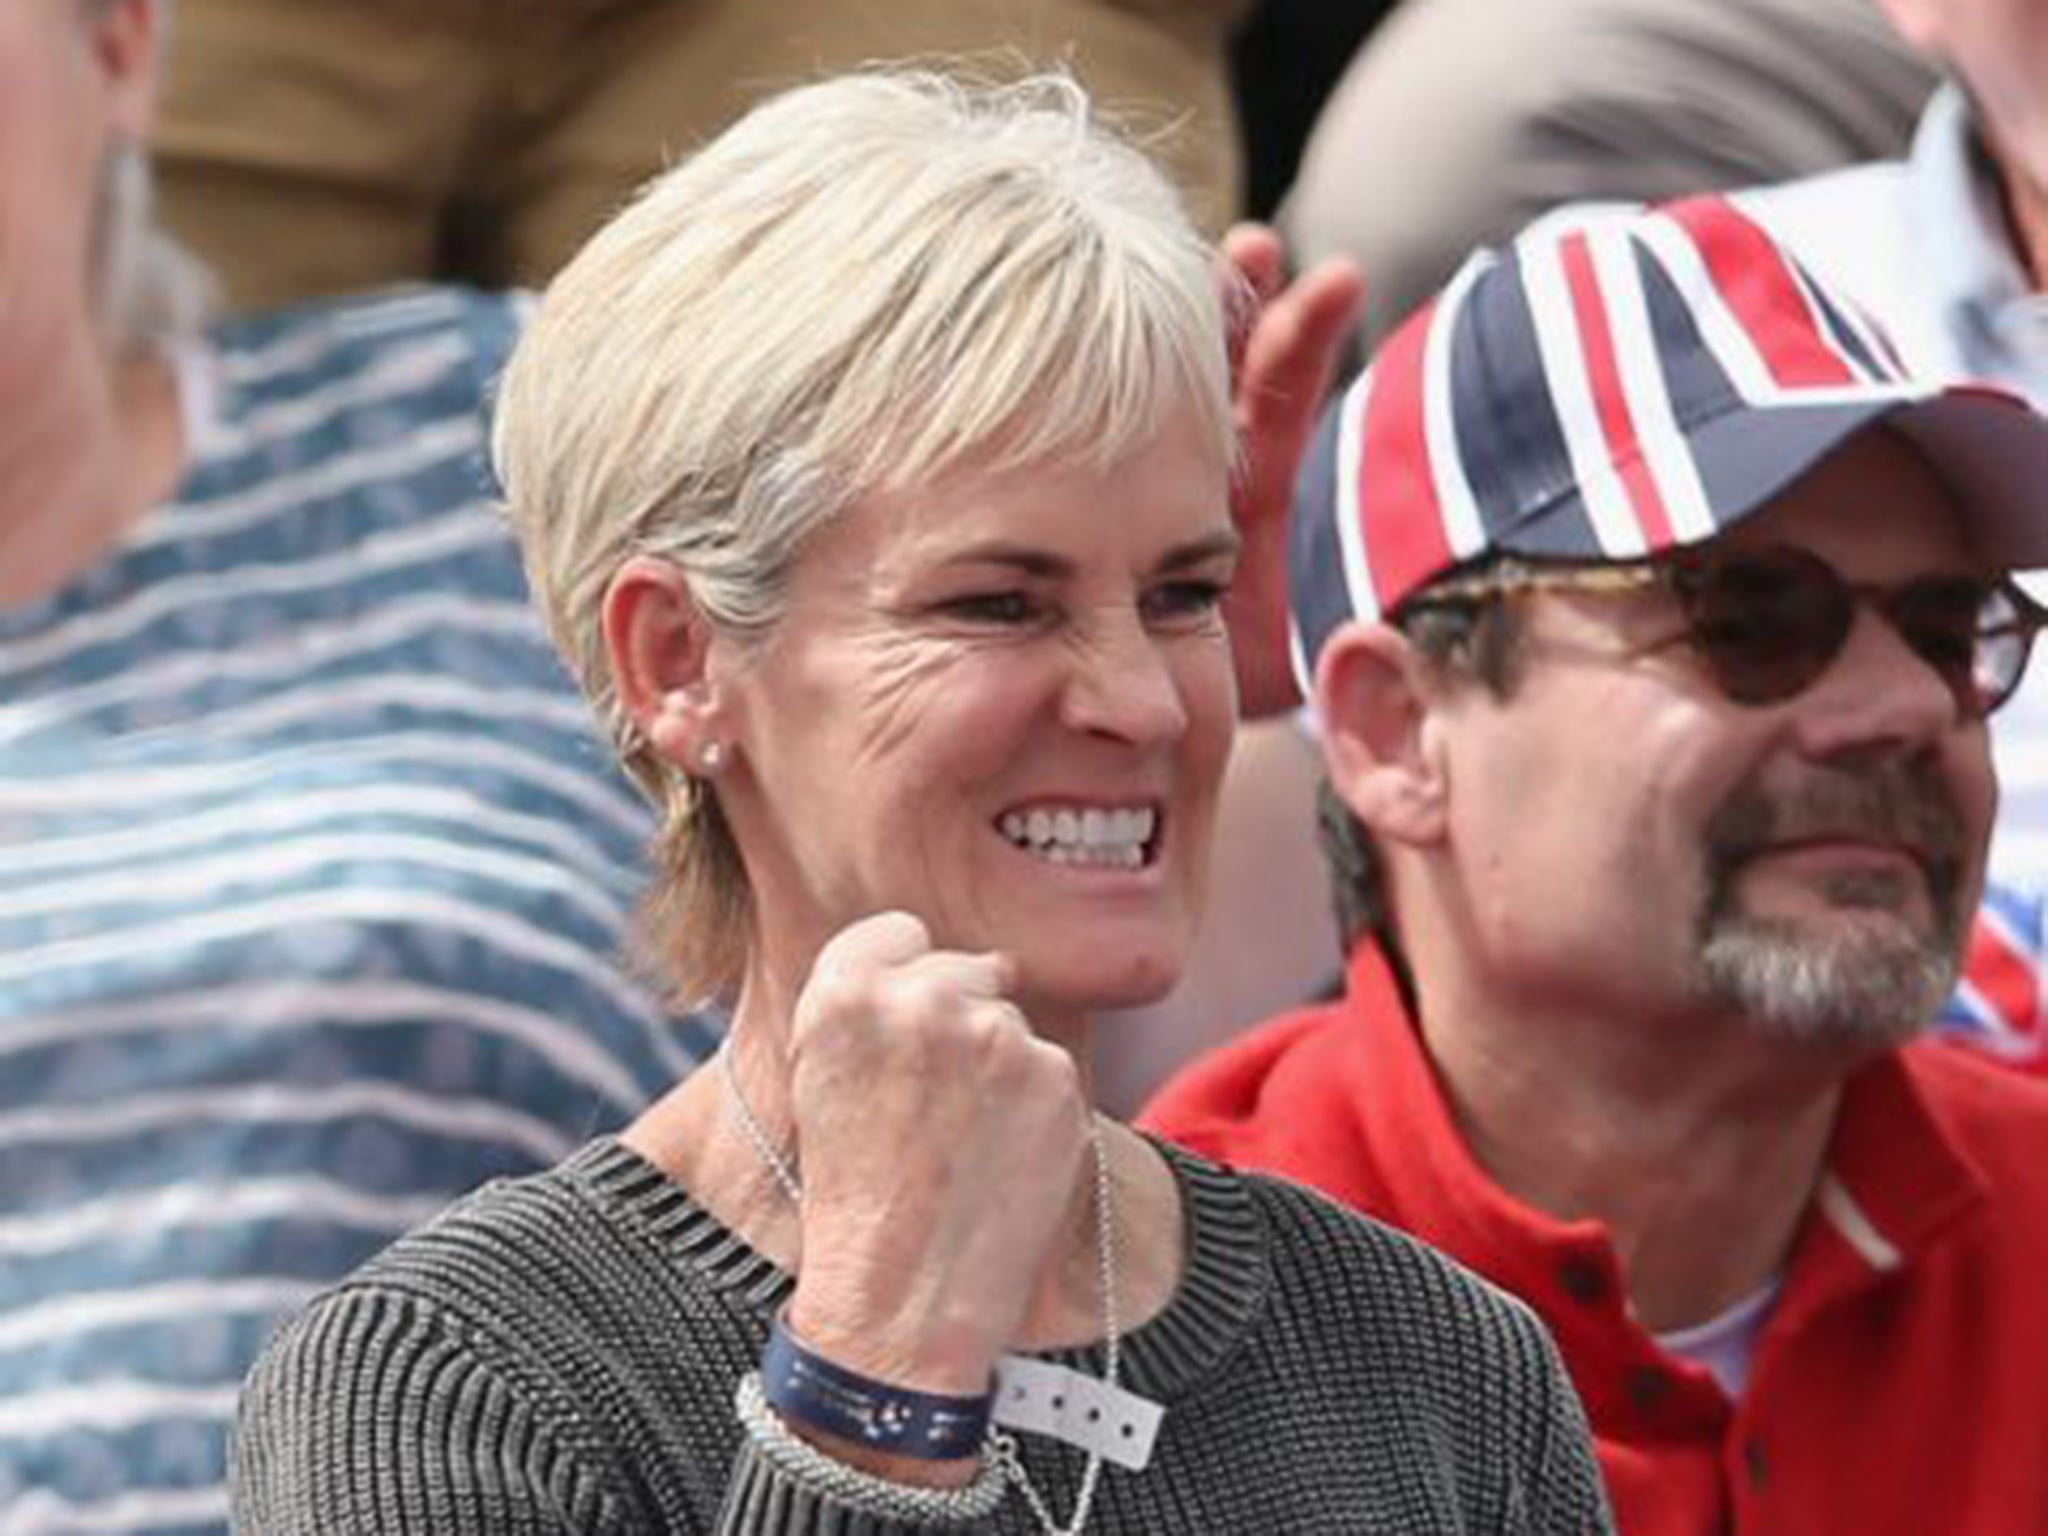 Judy Murray coached both her sons when they were young and is Great Britain’s Fed Cup captain